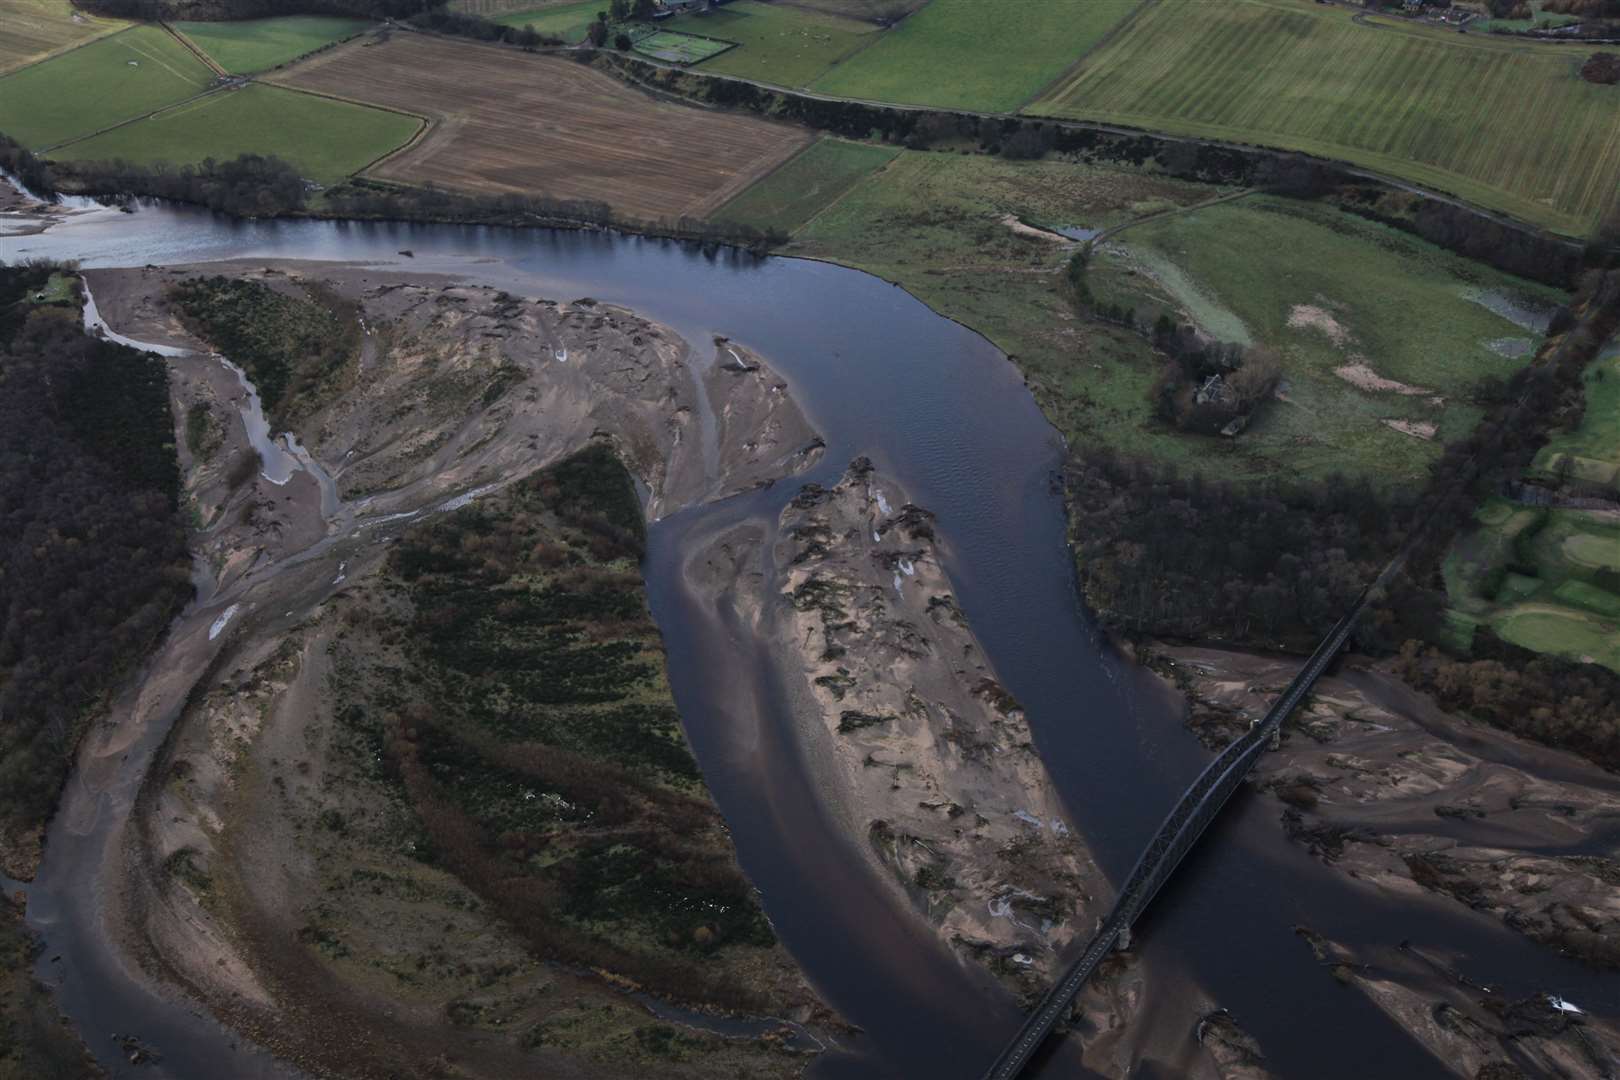 The River Spey winds on its journey north to the sea